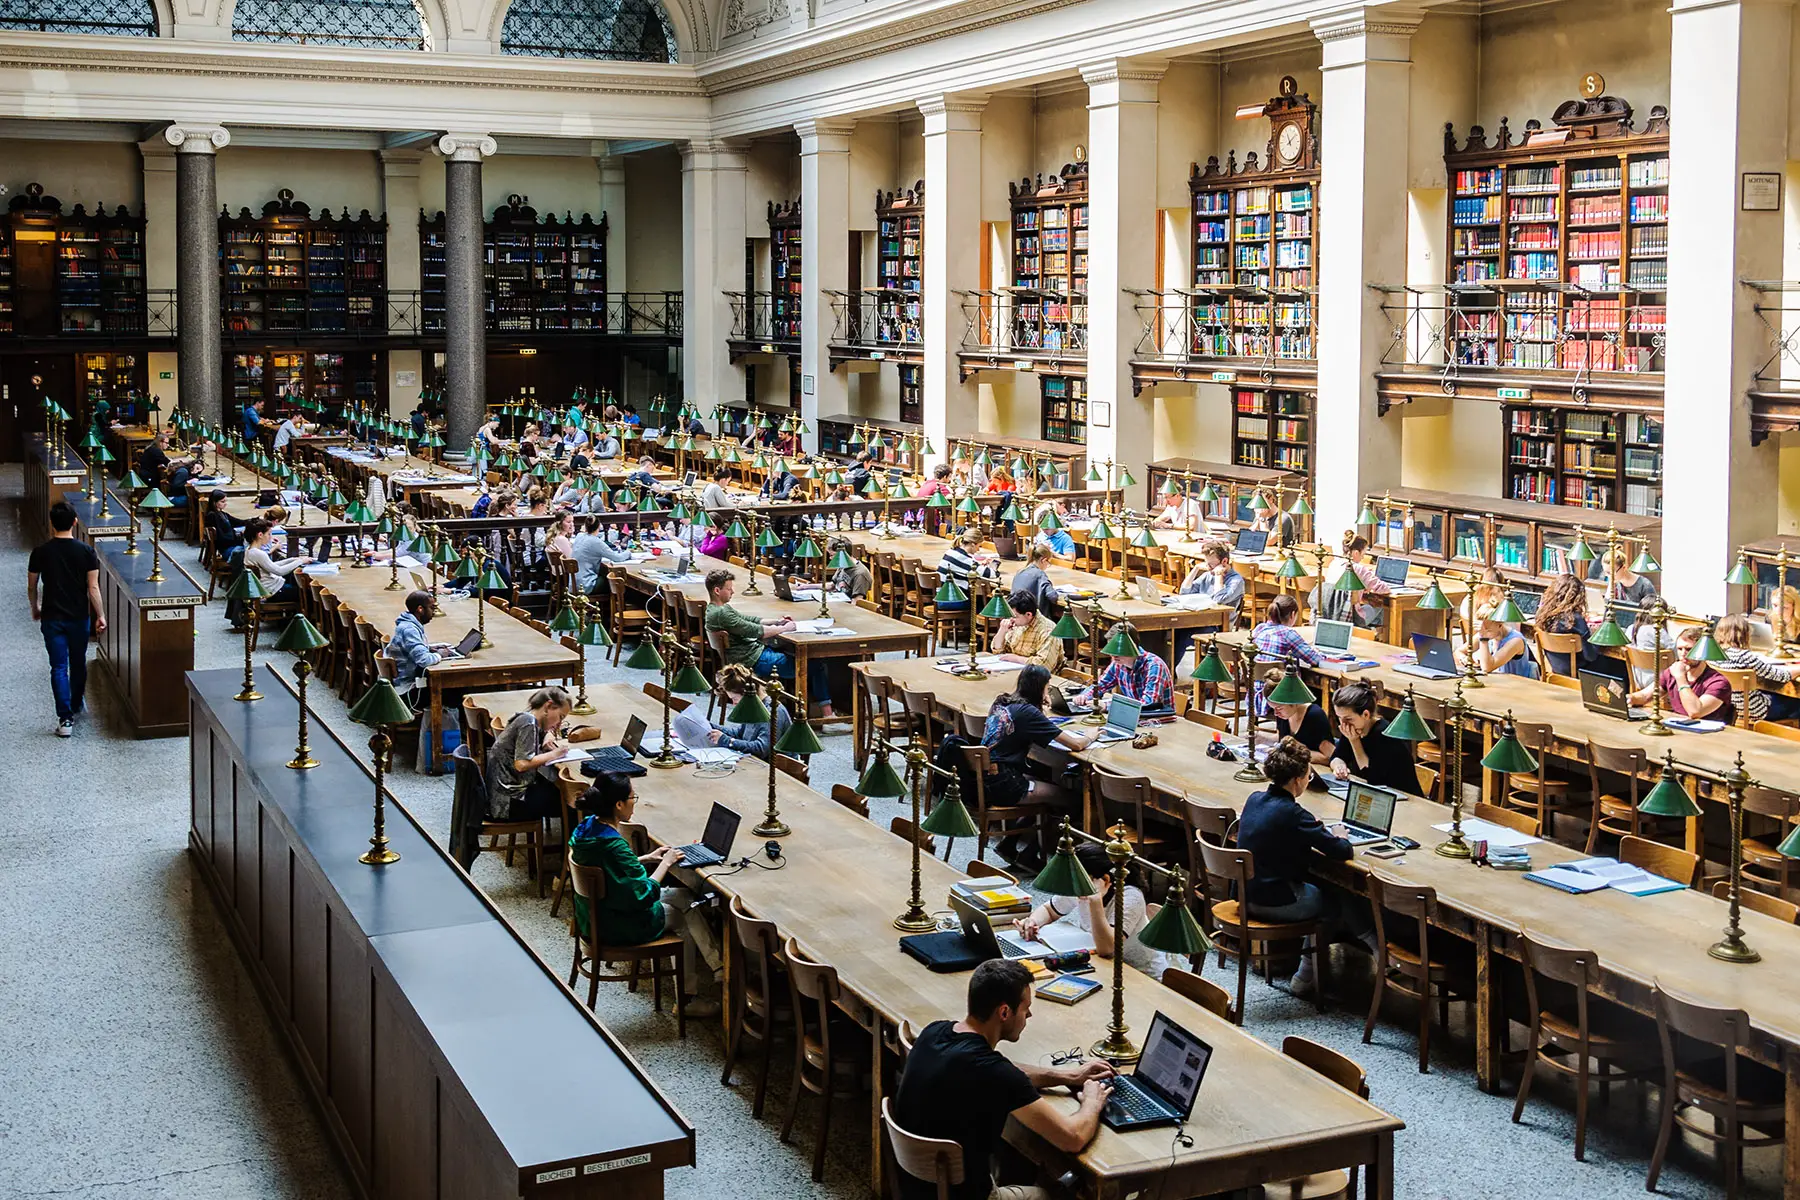 A reading room at the University of Vienna